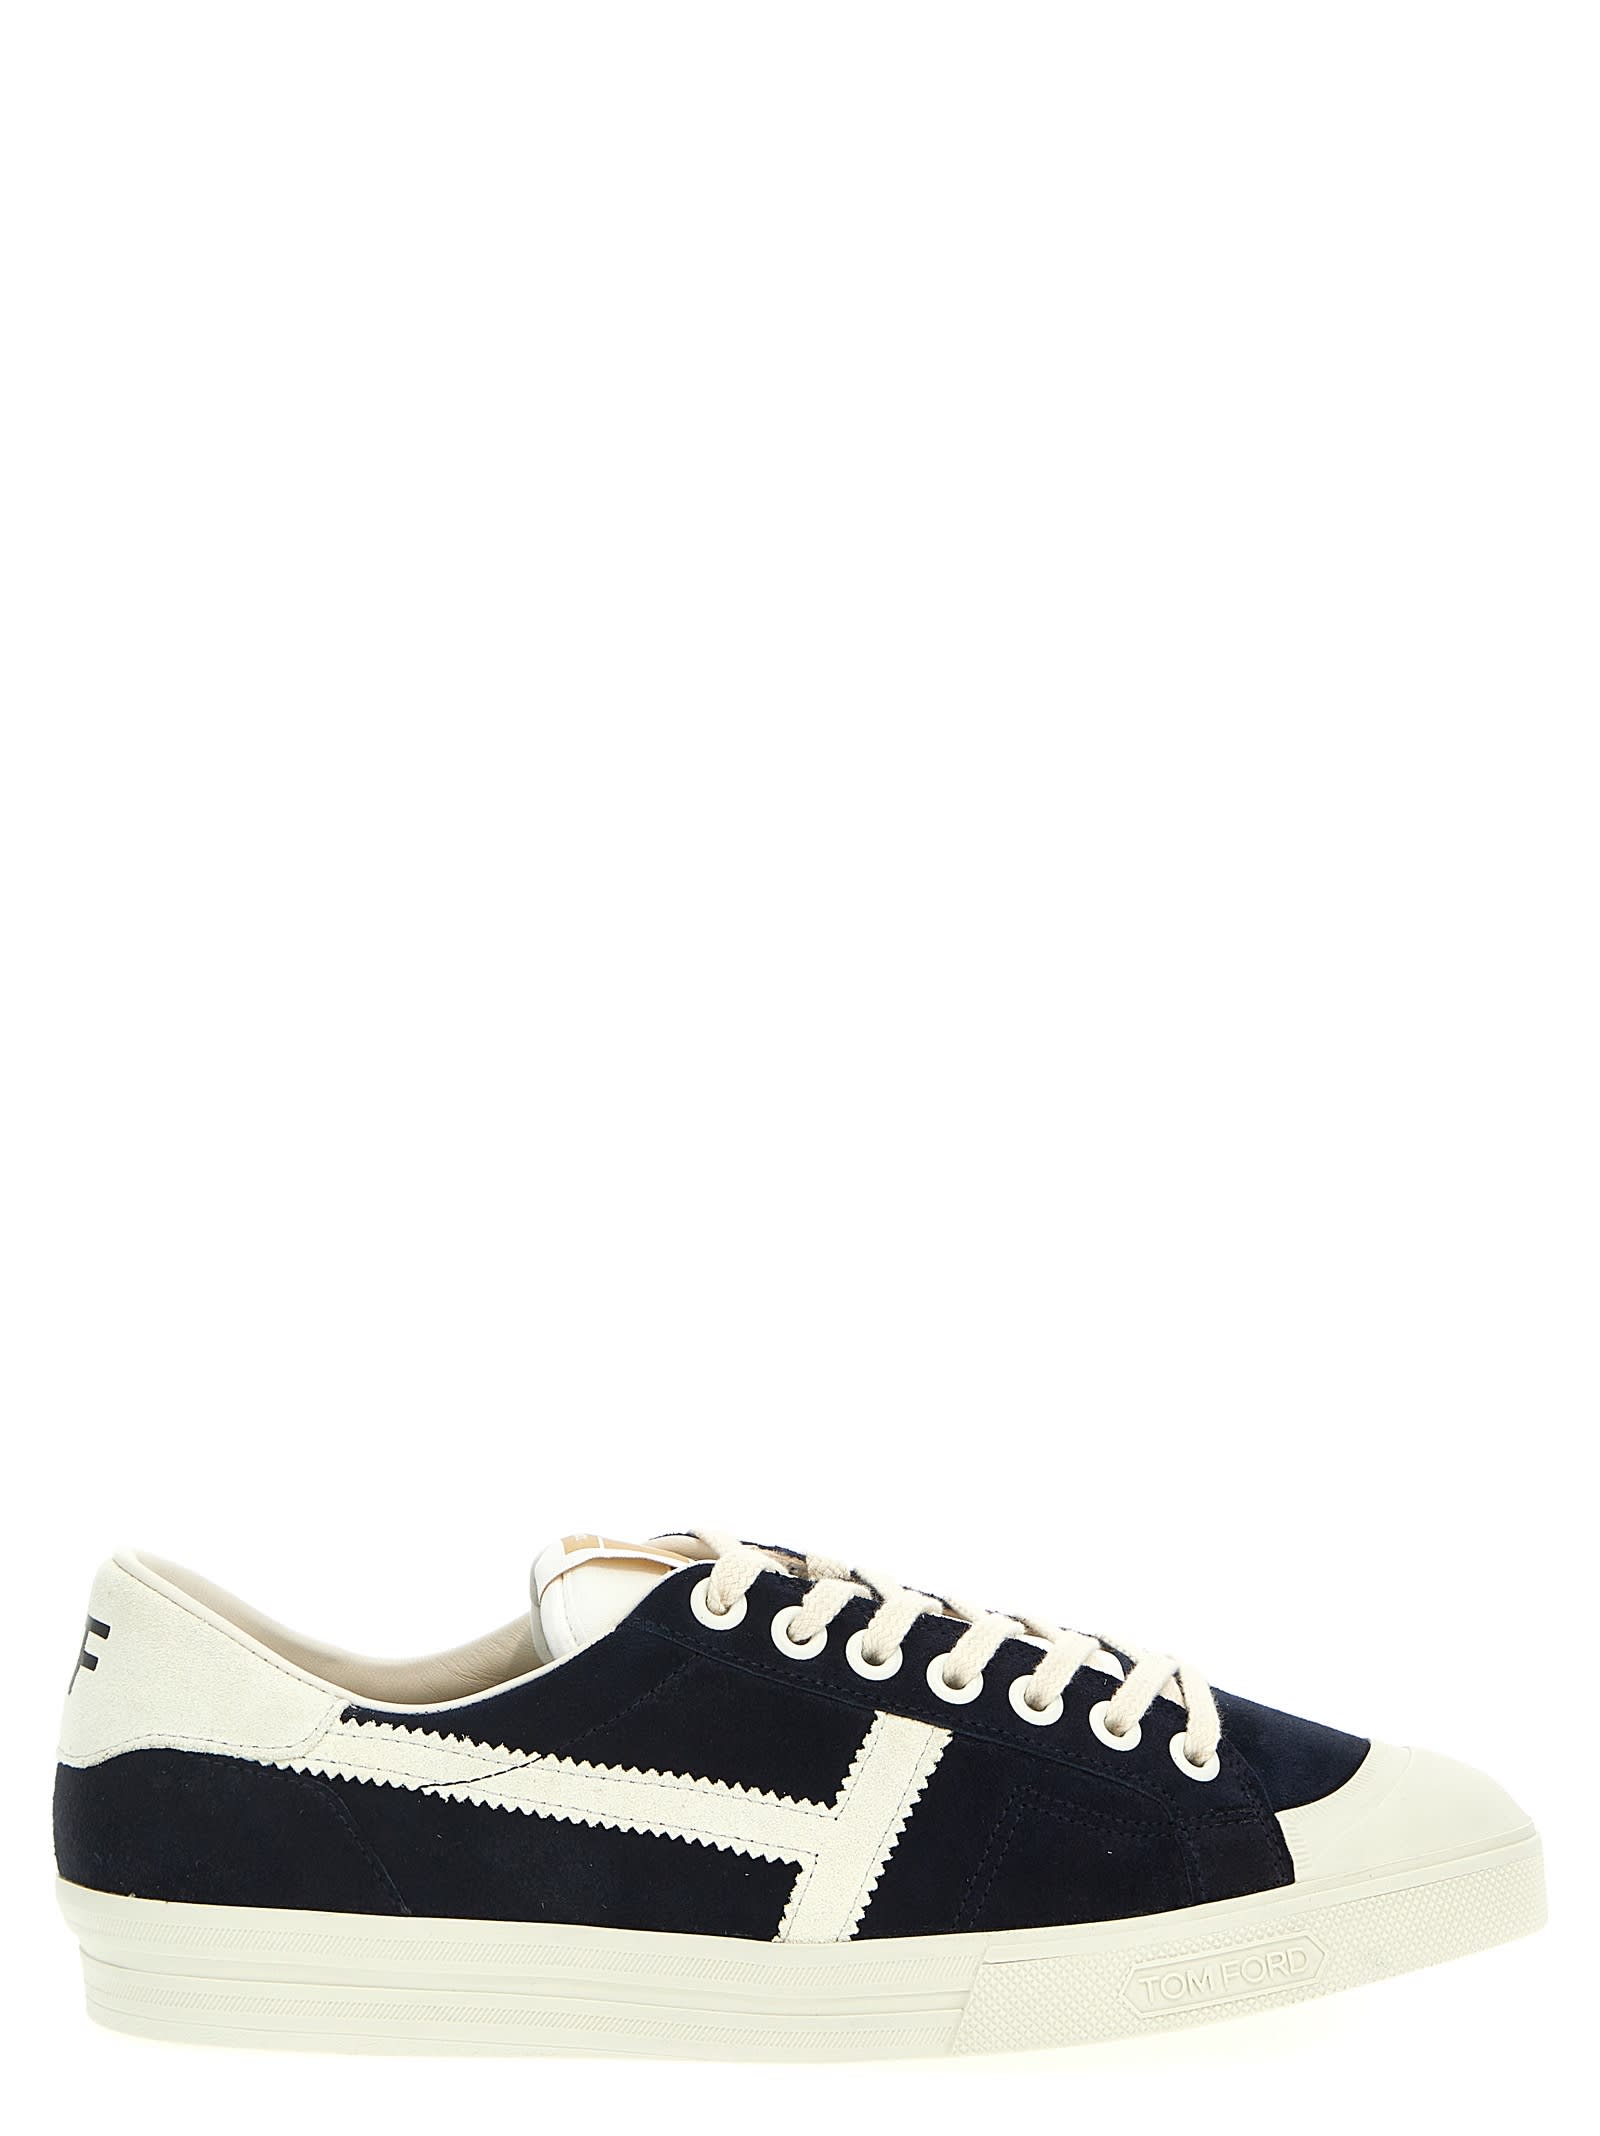 TOM FORD SUEDE trainers